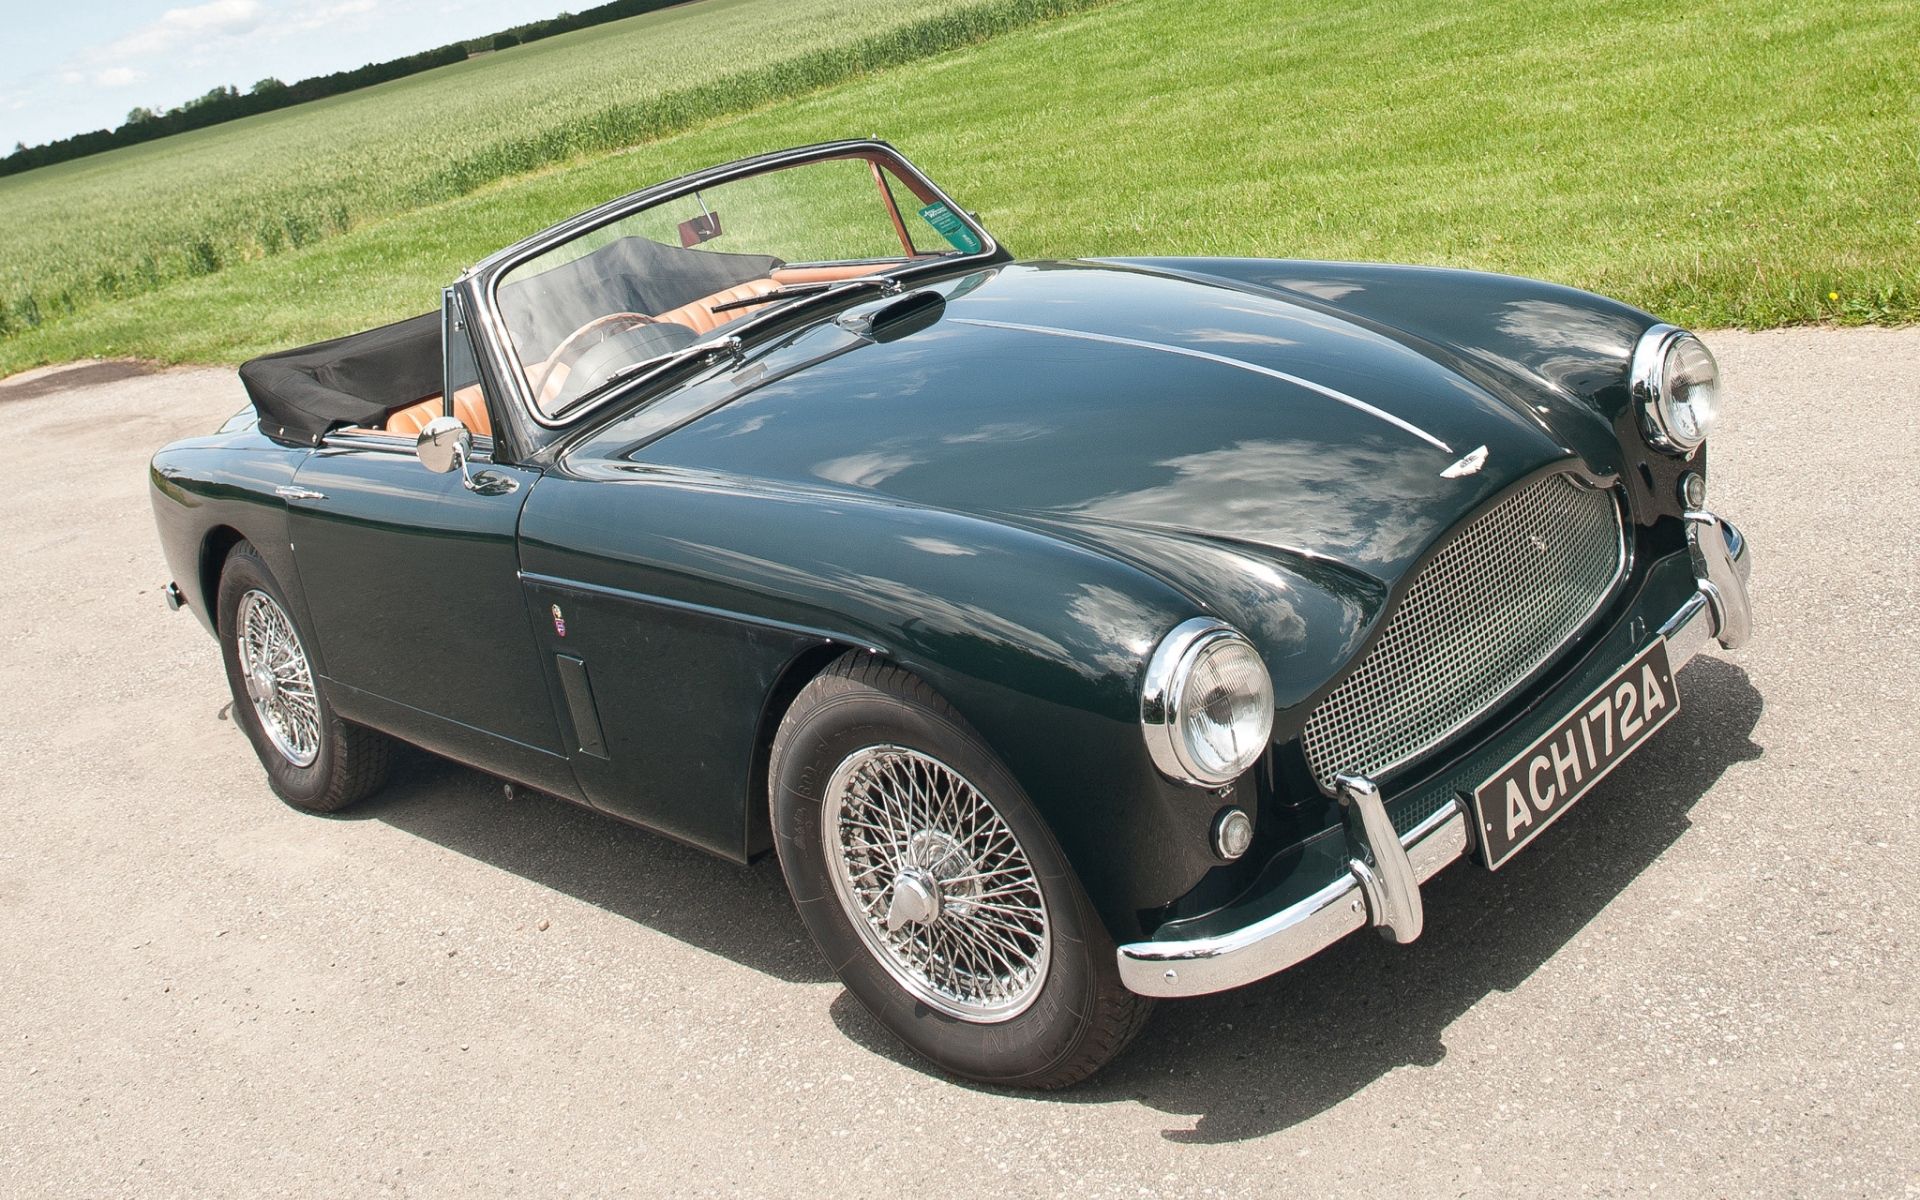 aston martin, cars, side view, cabriolet, 1957, drophead coupe